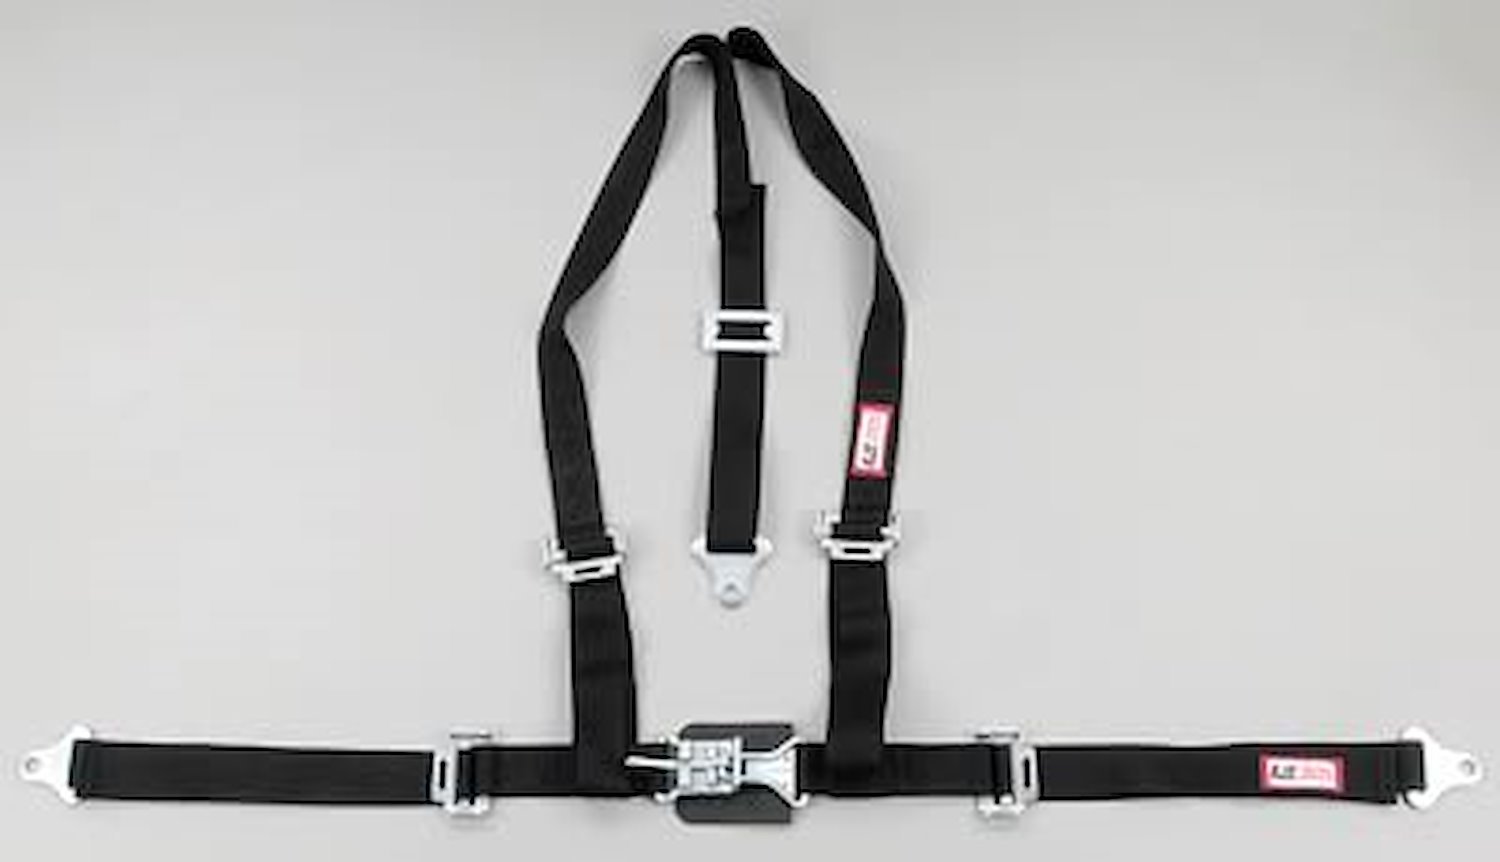 NON-SFI L&L HARNESS 2 PULL UP Lap Belt SNAP SEWN IN 2 S.H. Individual ROLL BAR Mount WRAP/BOLT BLUE